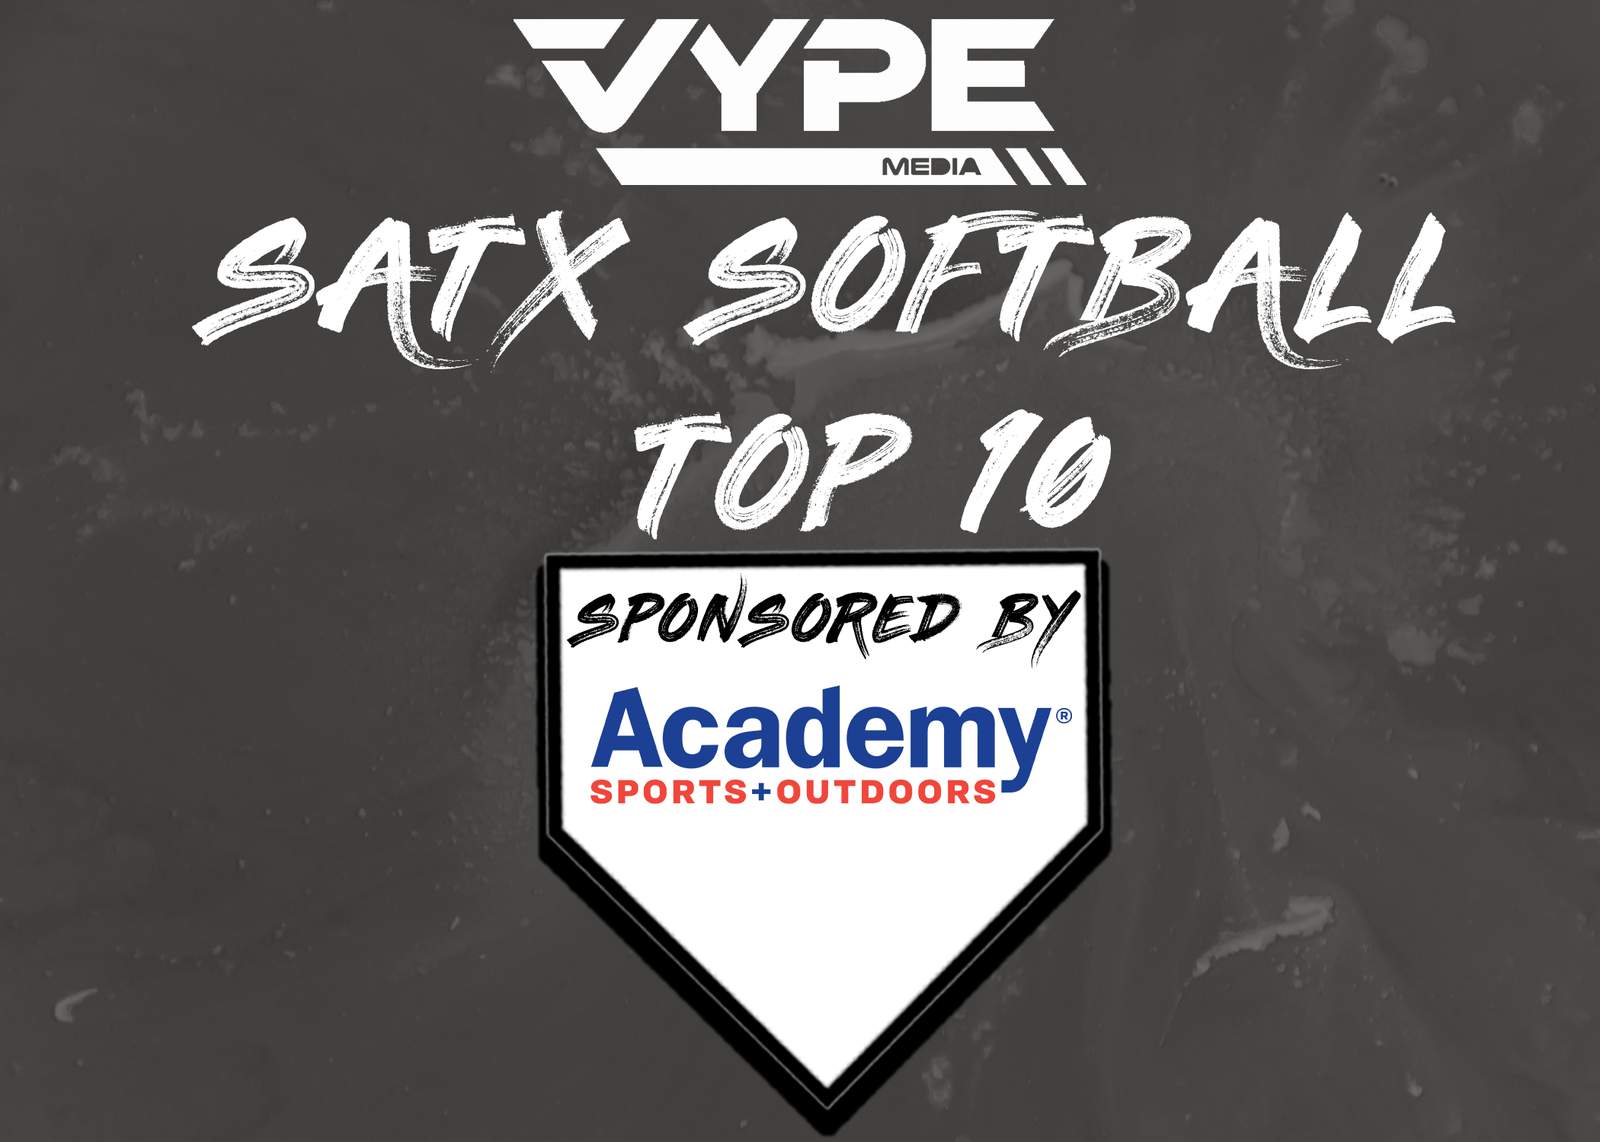 VYPE San Antonio Softball Rankings: Week of 4/5/21 presented by Academy Sports + Outdoors